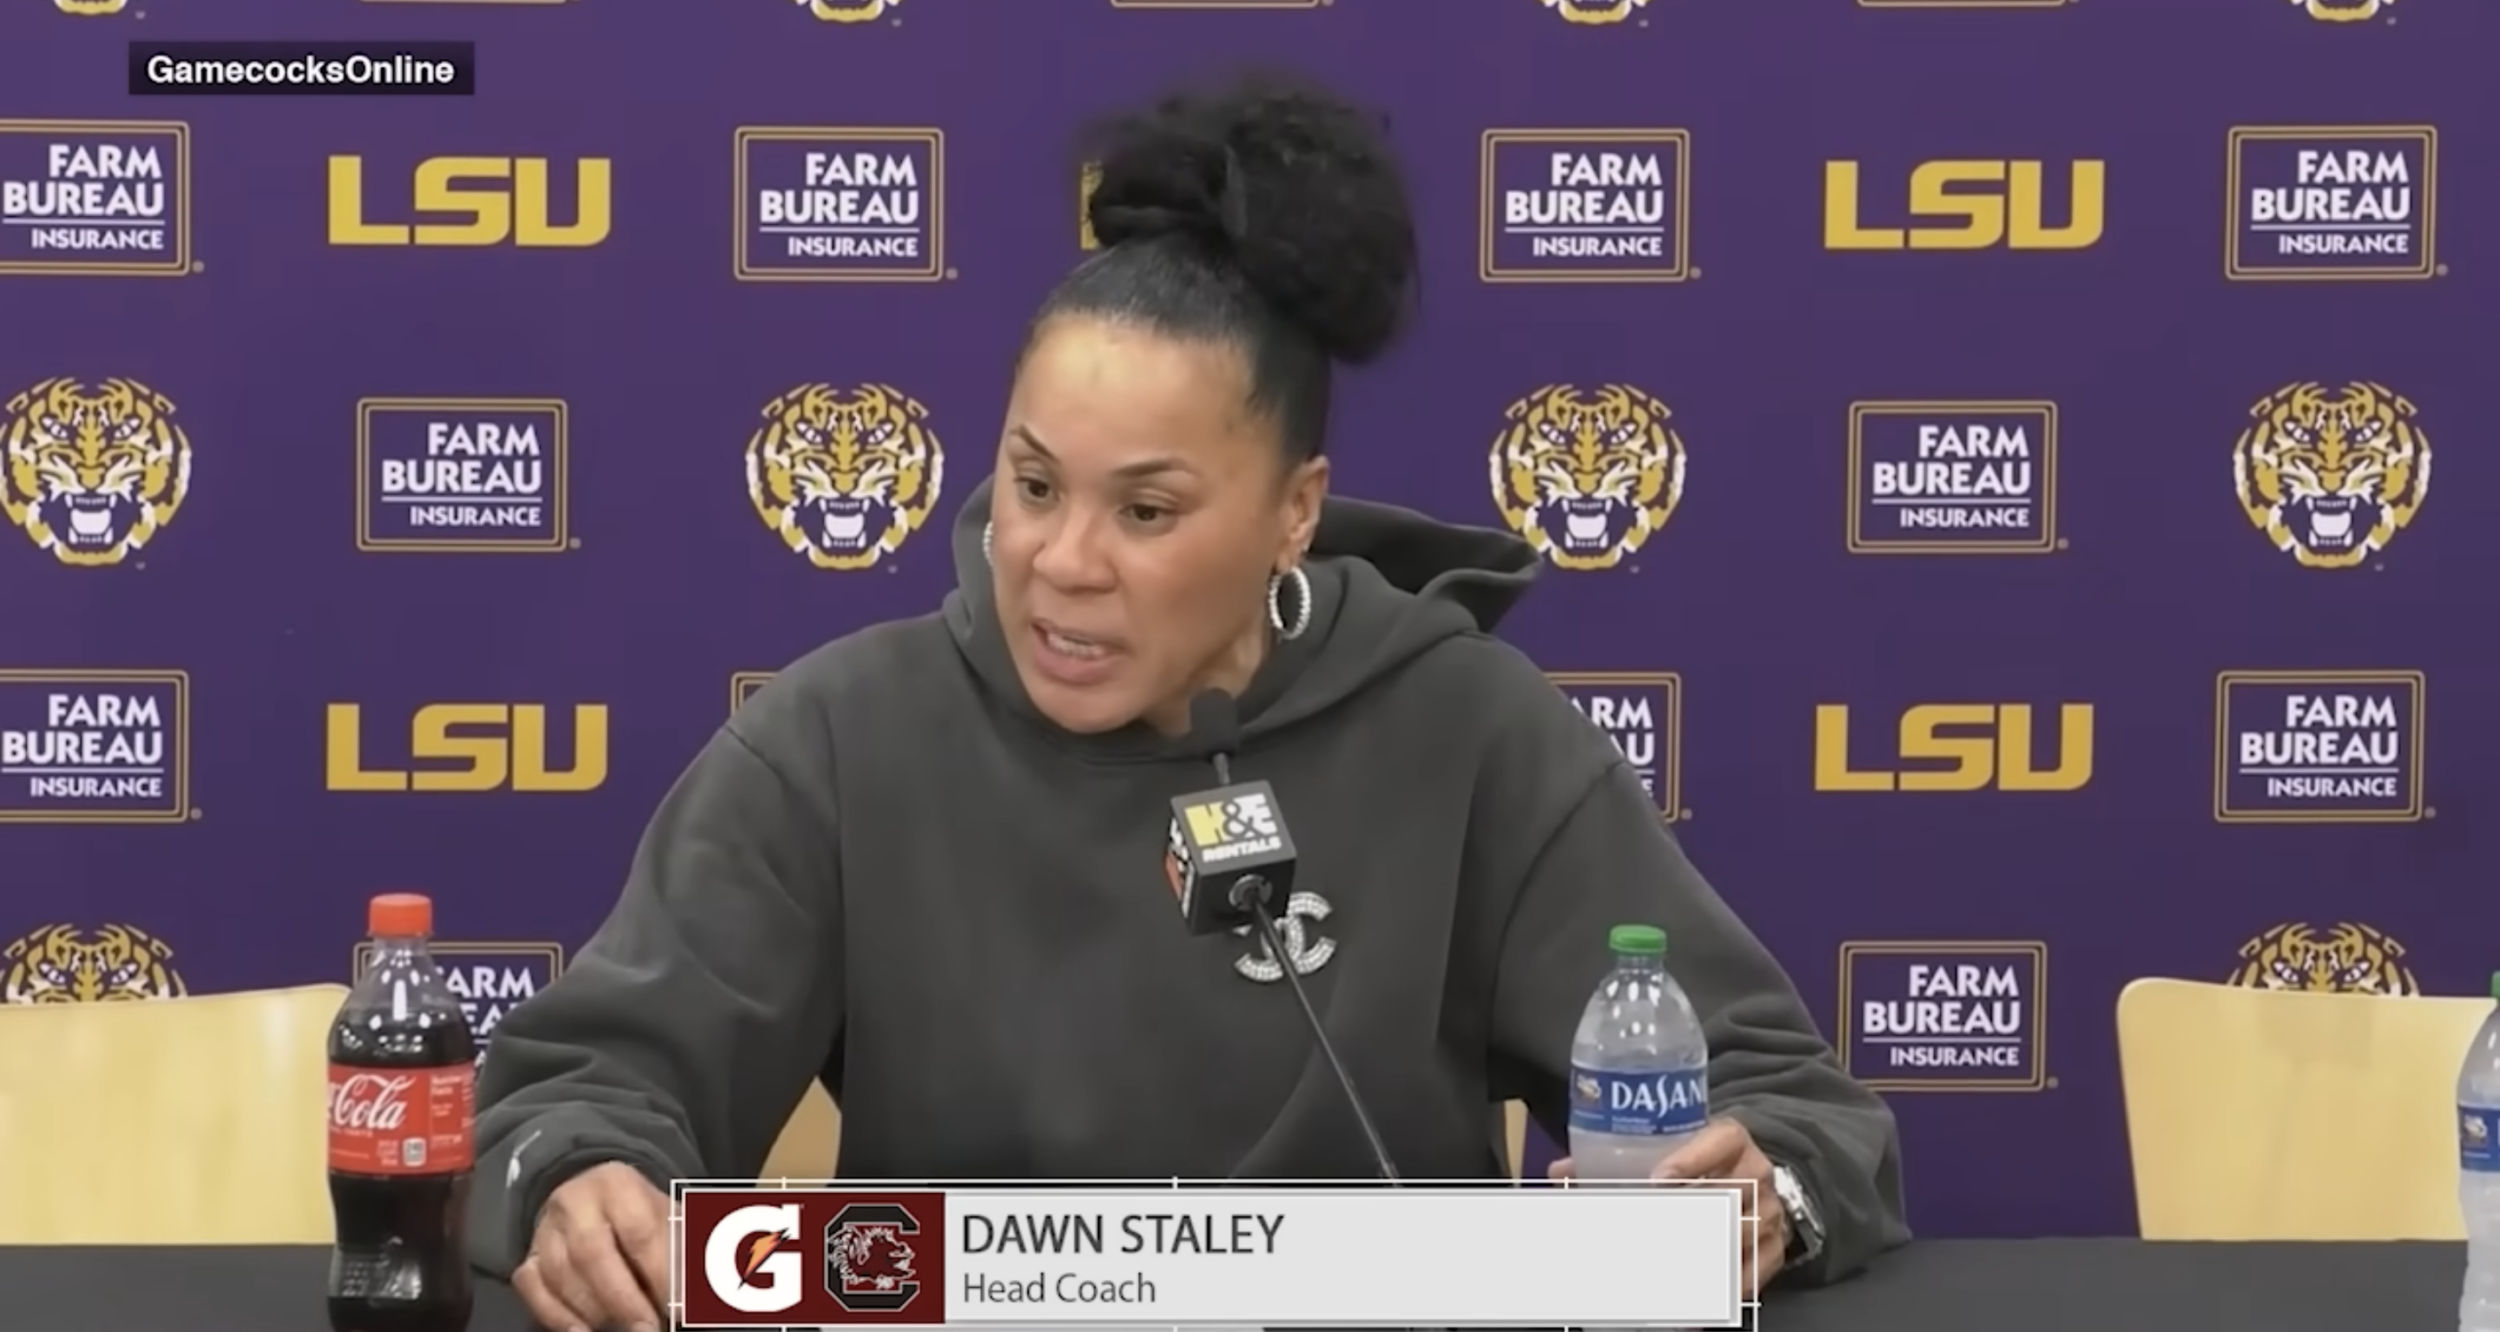 WBB PostGame News Conference: Dawn Staley - (LSU)